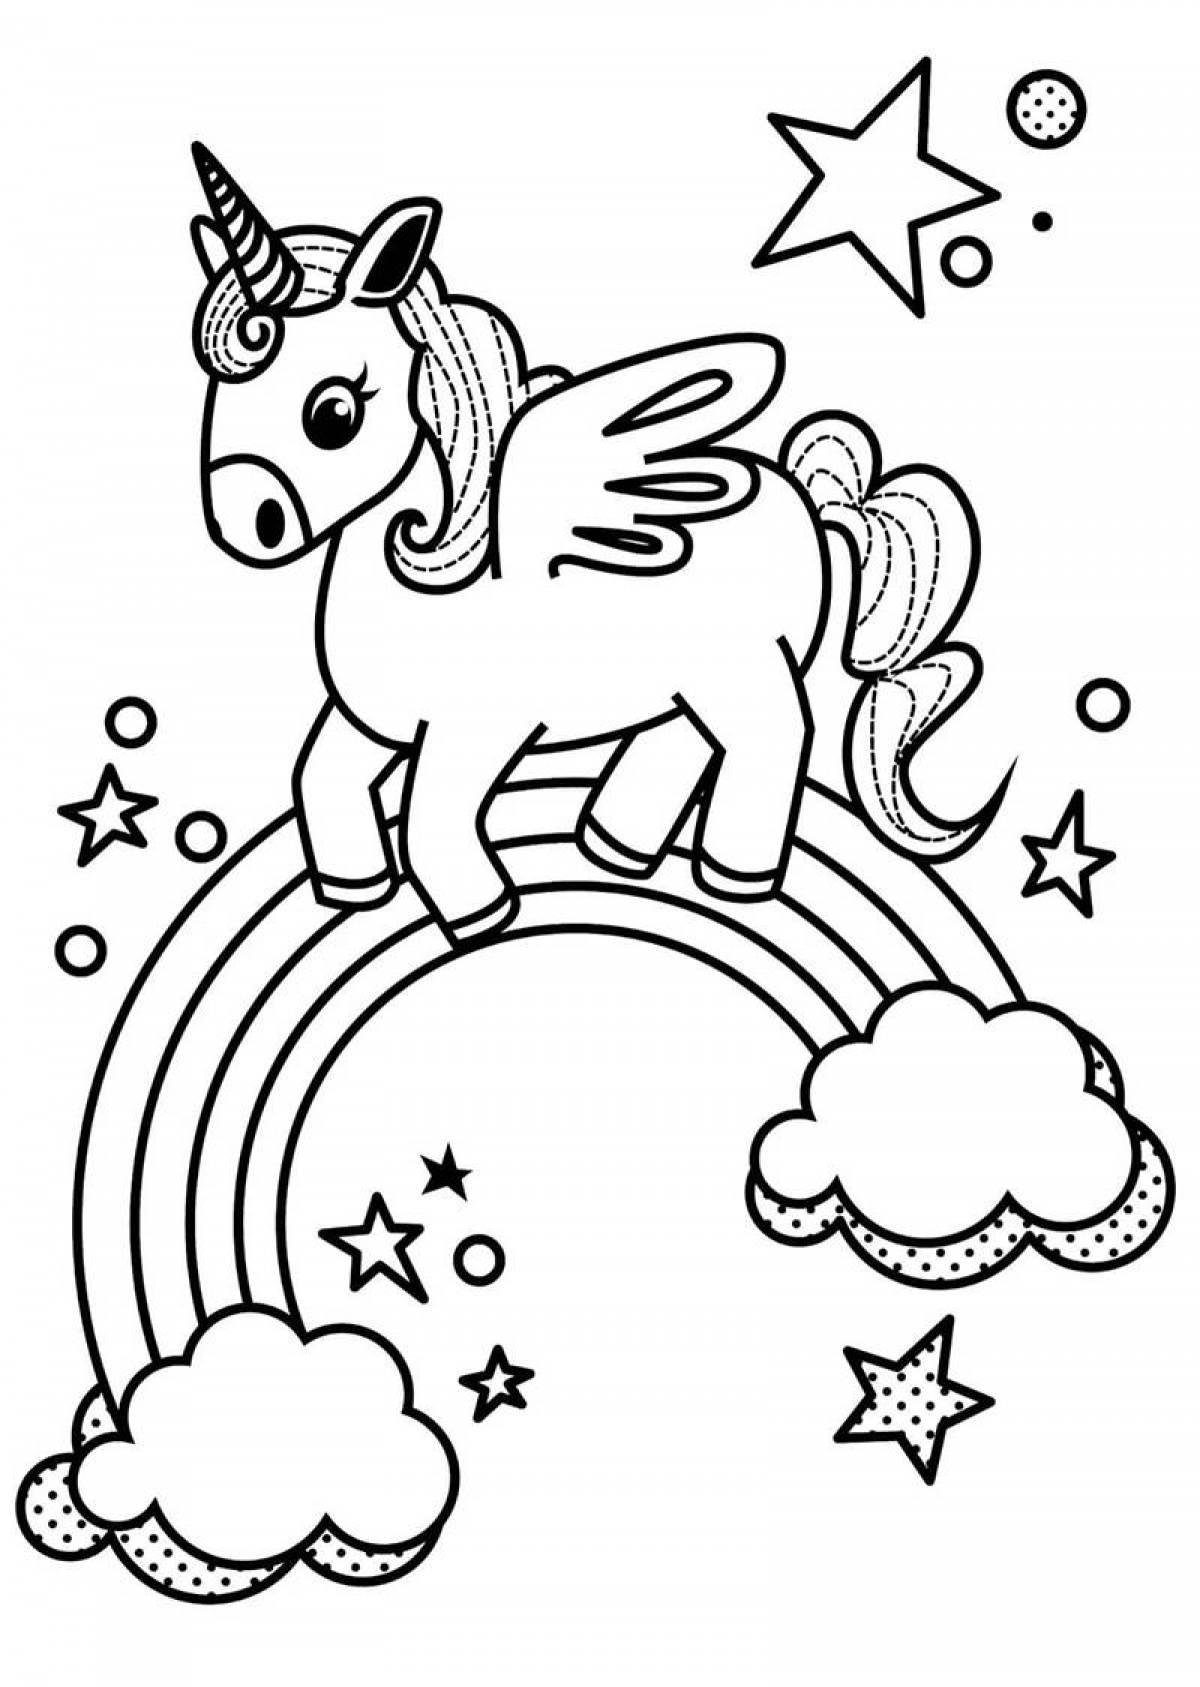 Exotic unicorn coloring book for kids